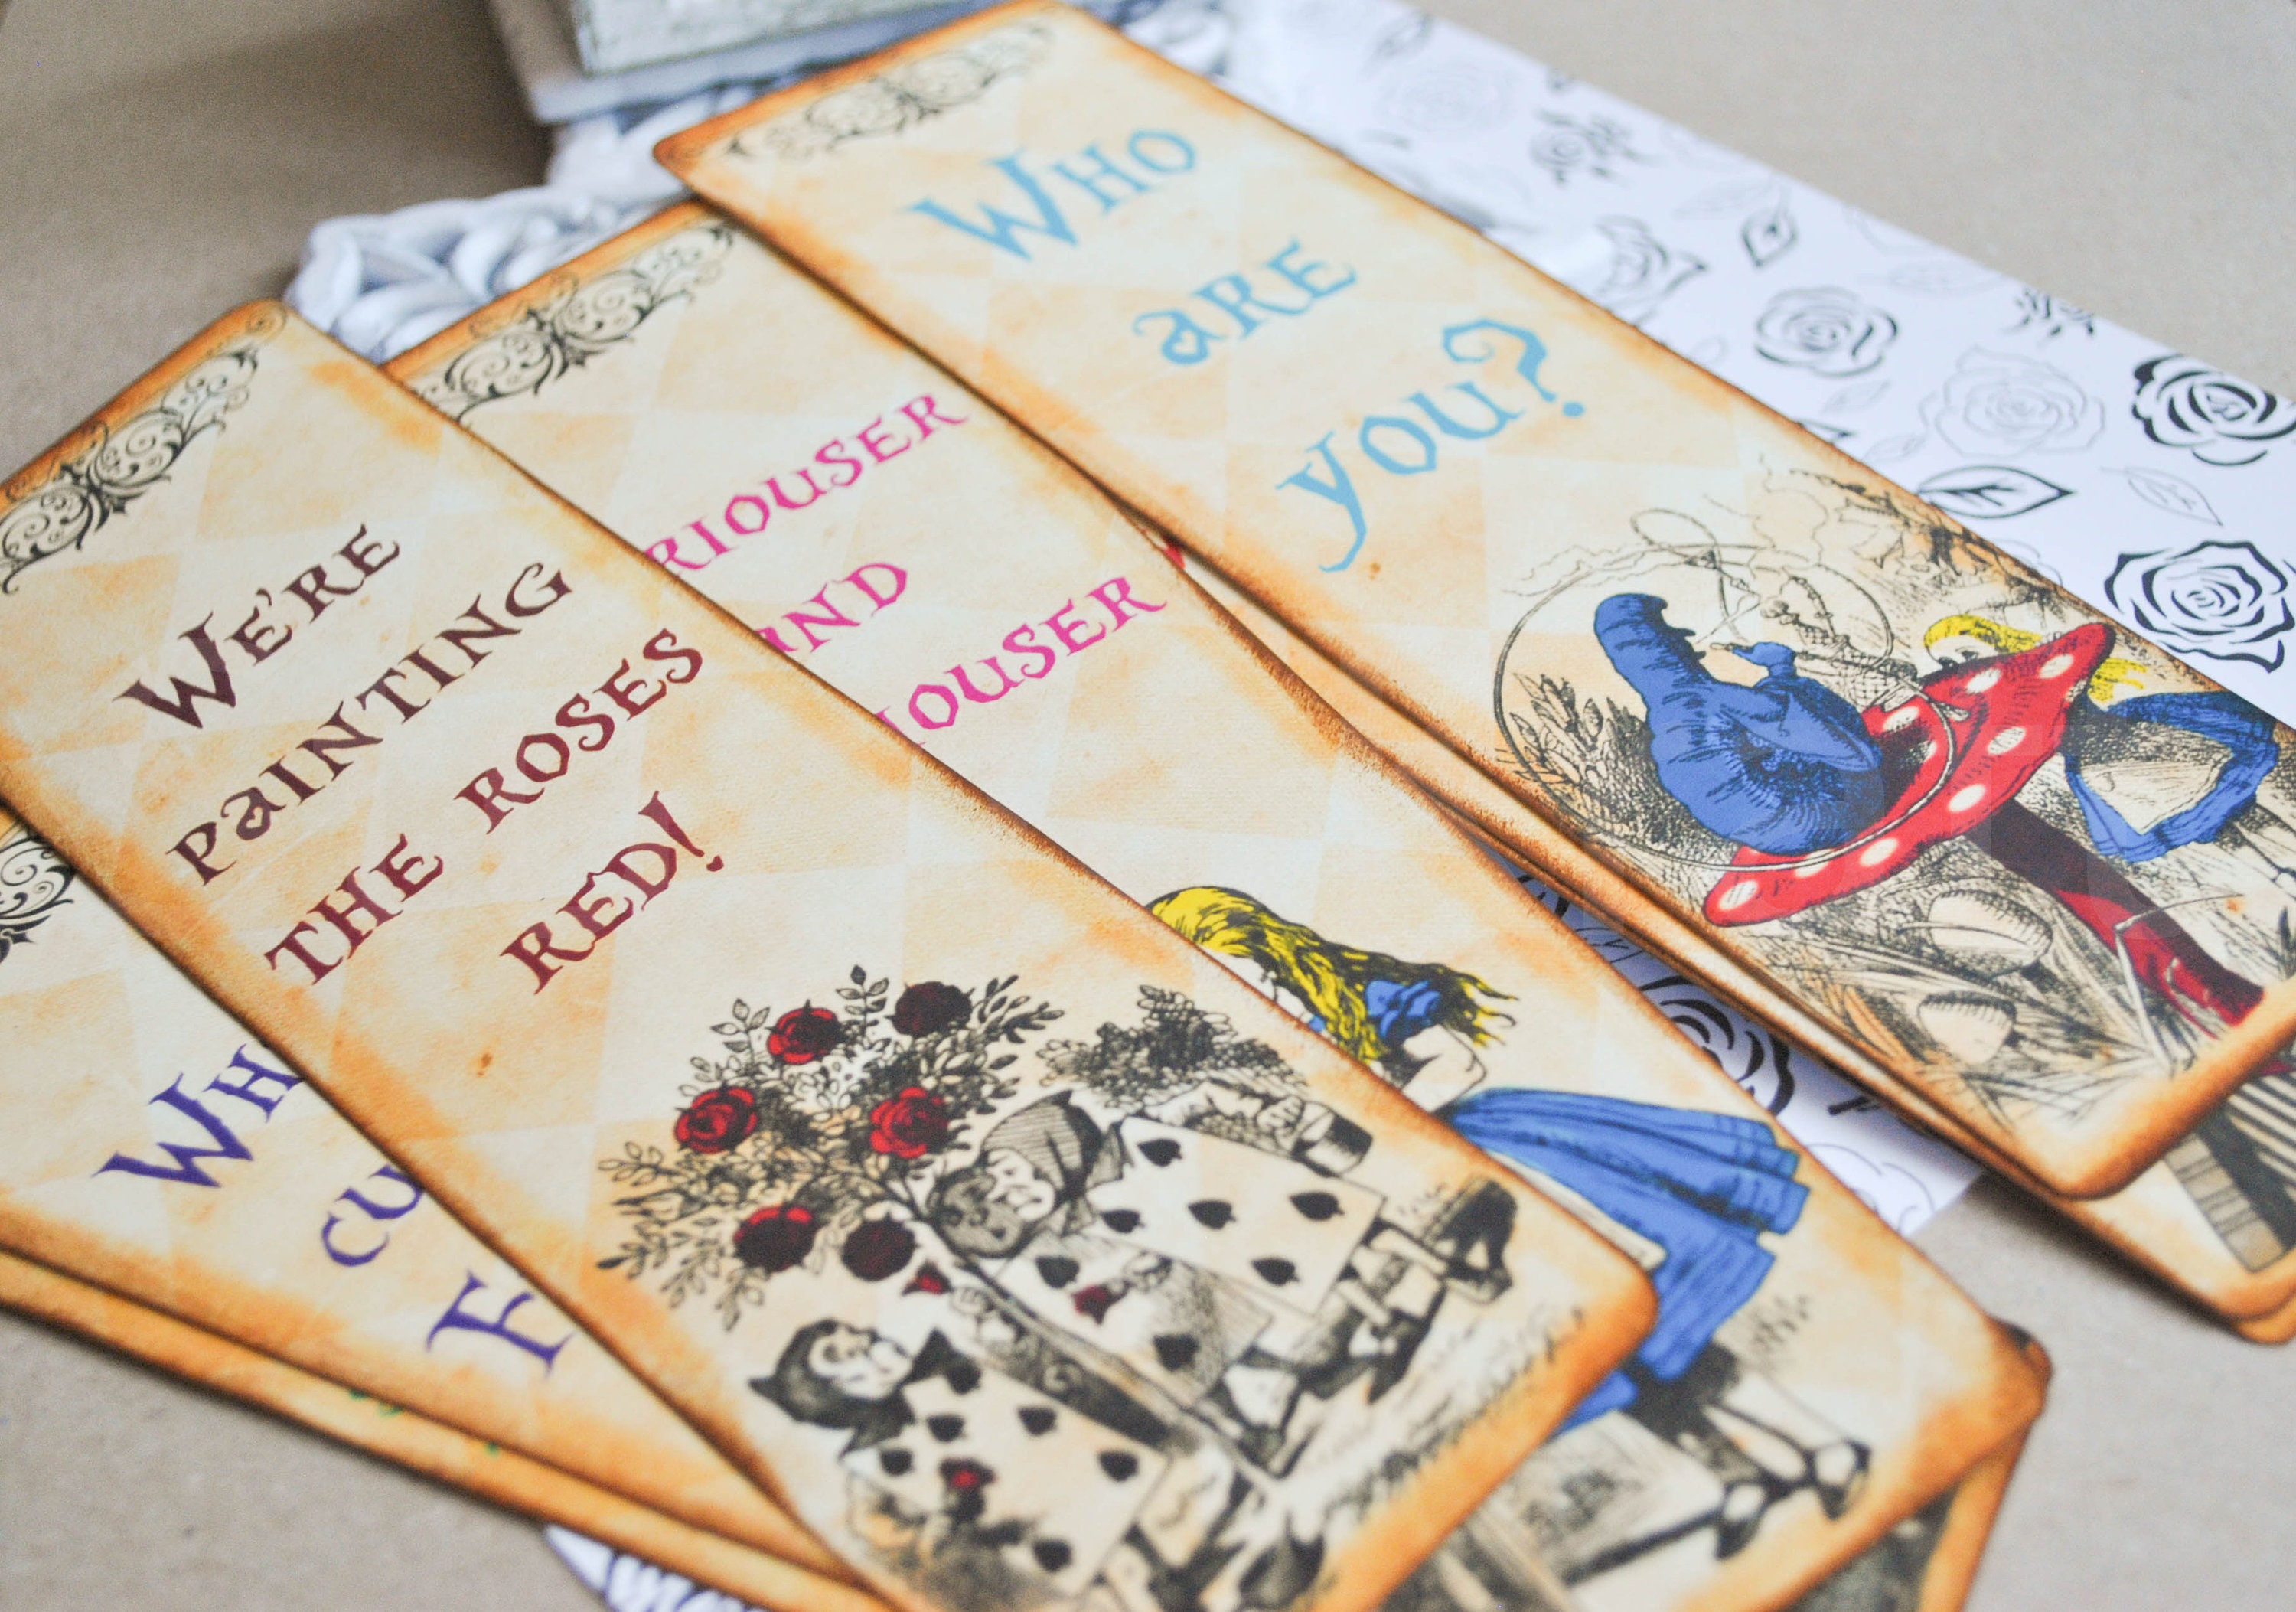 Alice in Wonderland Bookmarks Cards Series 1 (12-Pack) - Vintage Literary  Quotes Bookworm Reading Gifts - Bookish Theme Party Supplies for Men Women